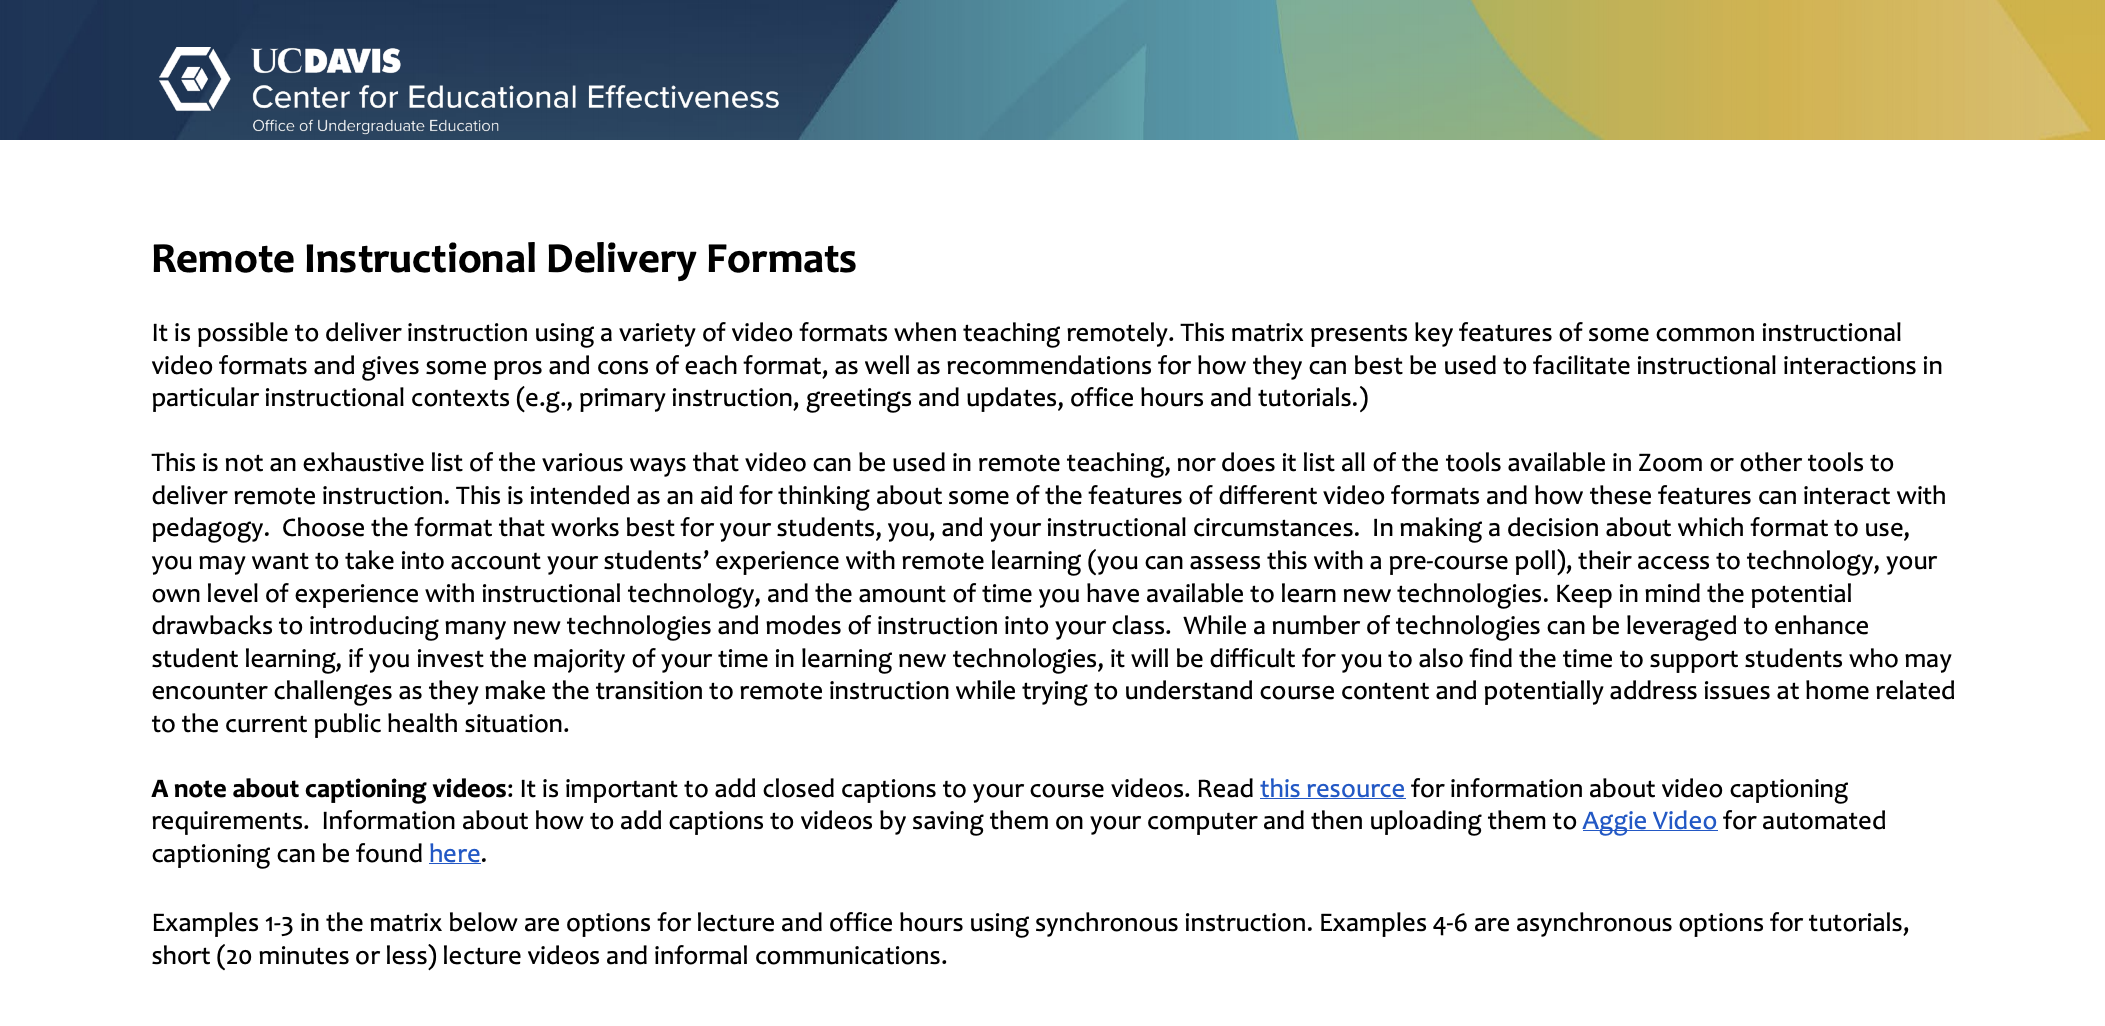 Remote Instructional Delivery Formats